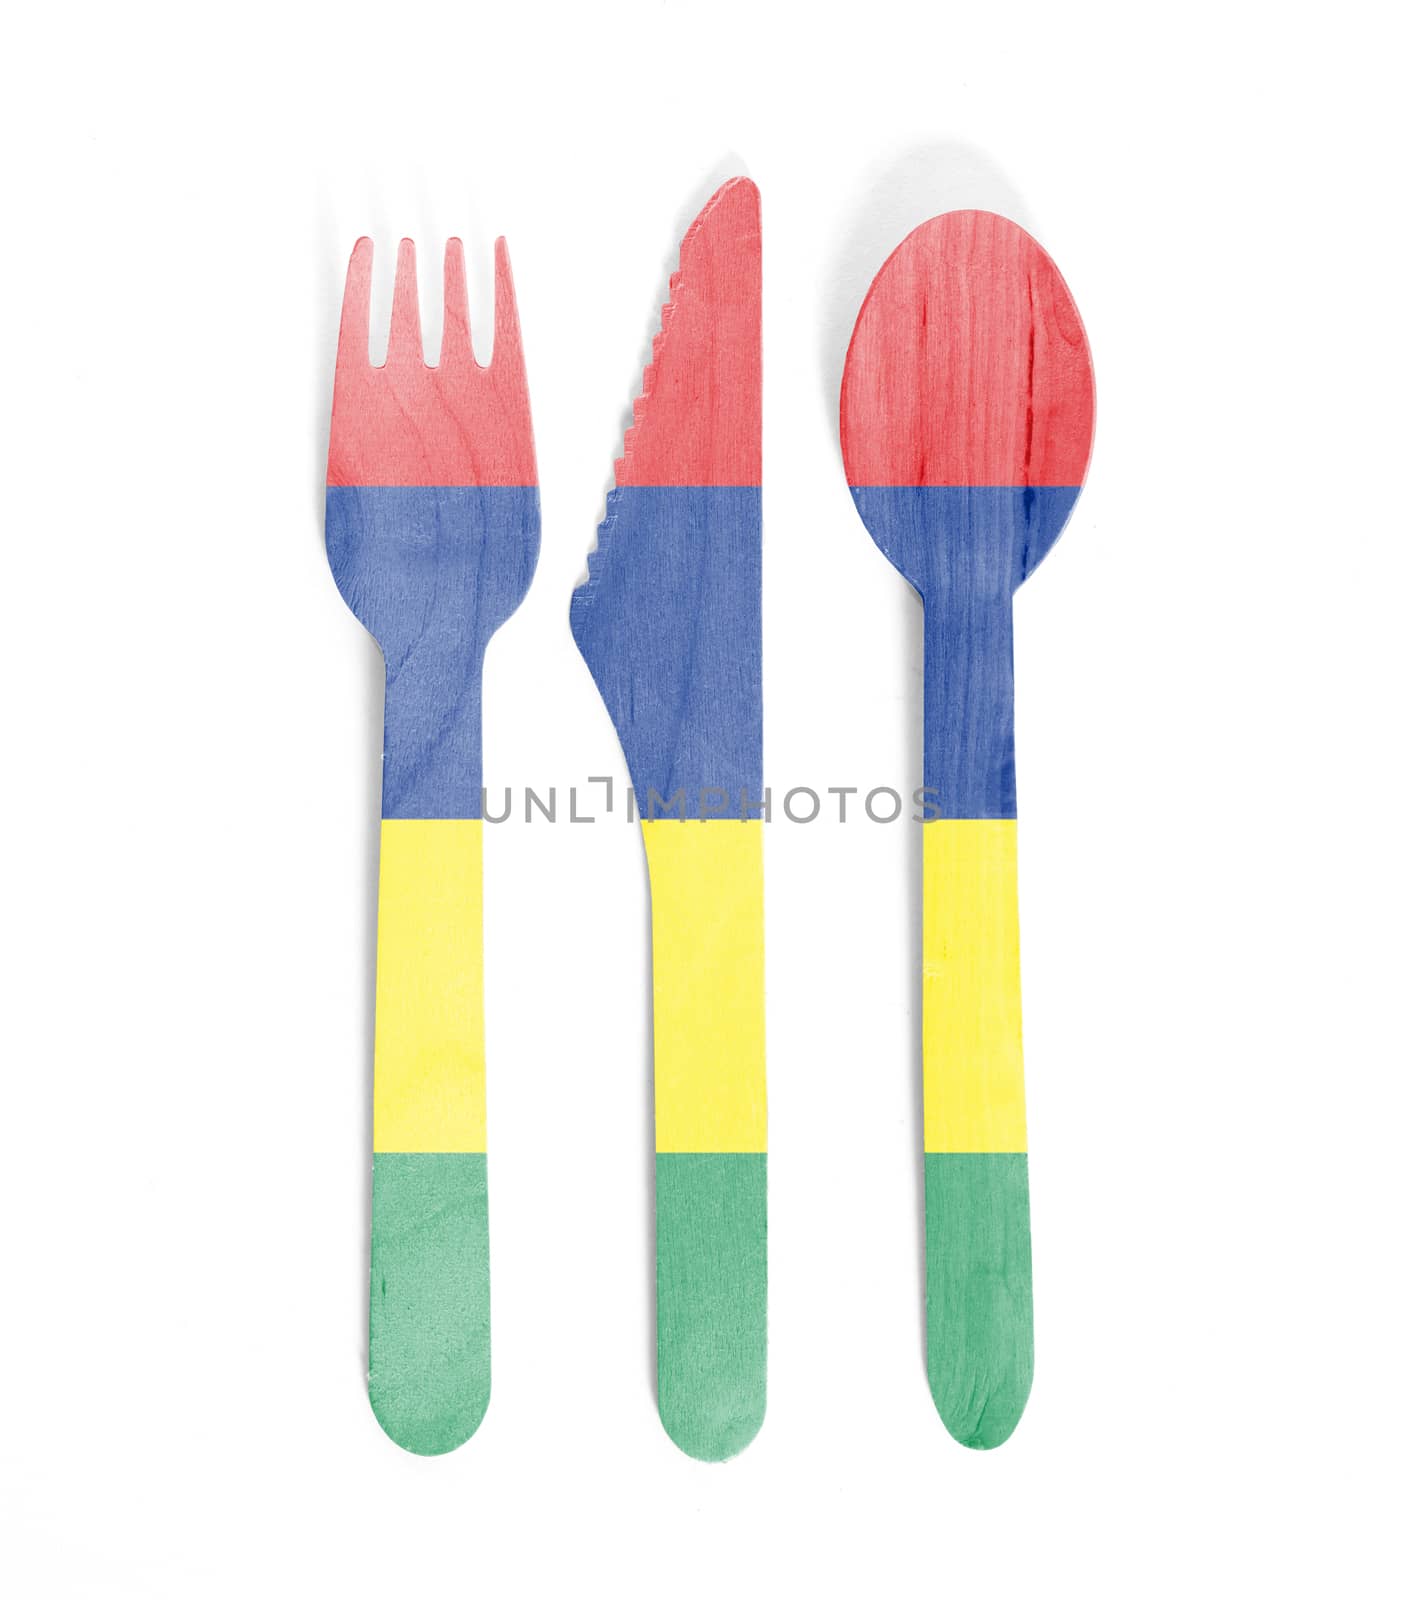 Eco friendly wooden cutlery - Plastic free concept - Isolated - Flag of Mauritius